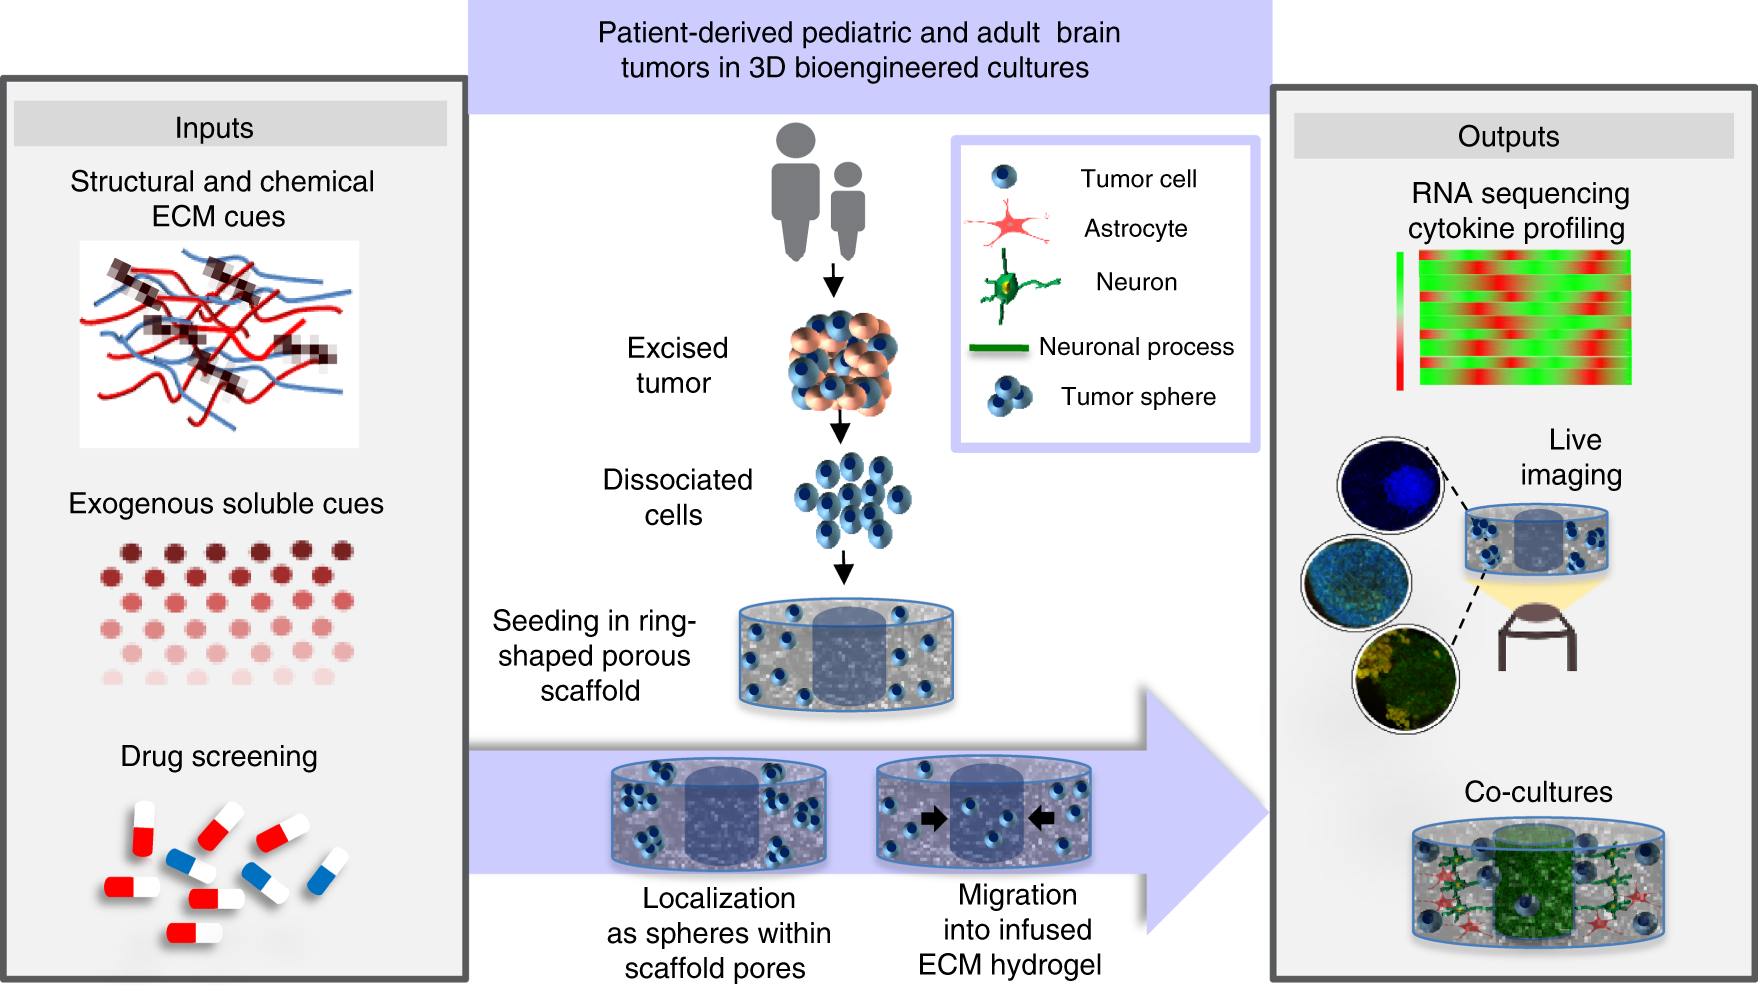 3D extracellular matrix microenvironment in bioengineered tissue models of  primary pediatric and adult brain tumors